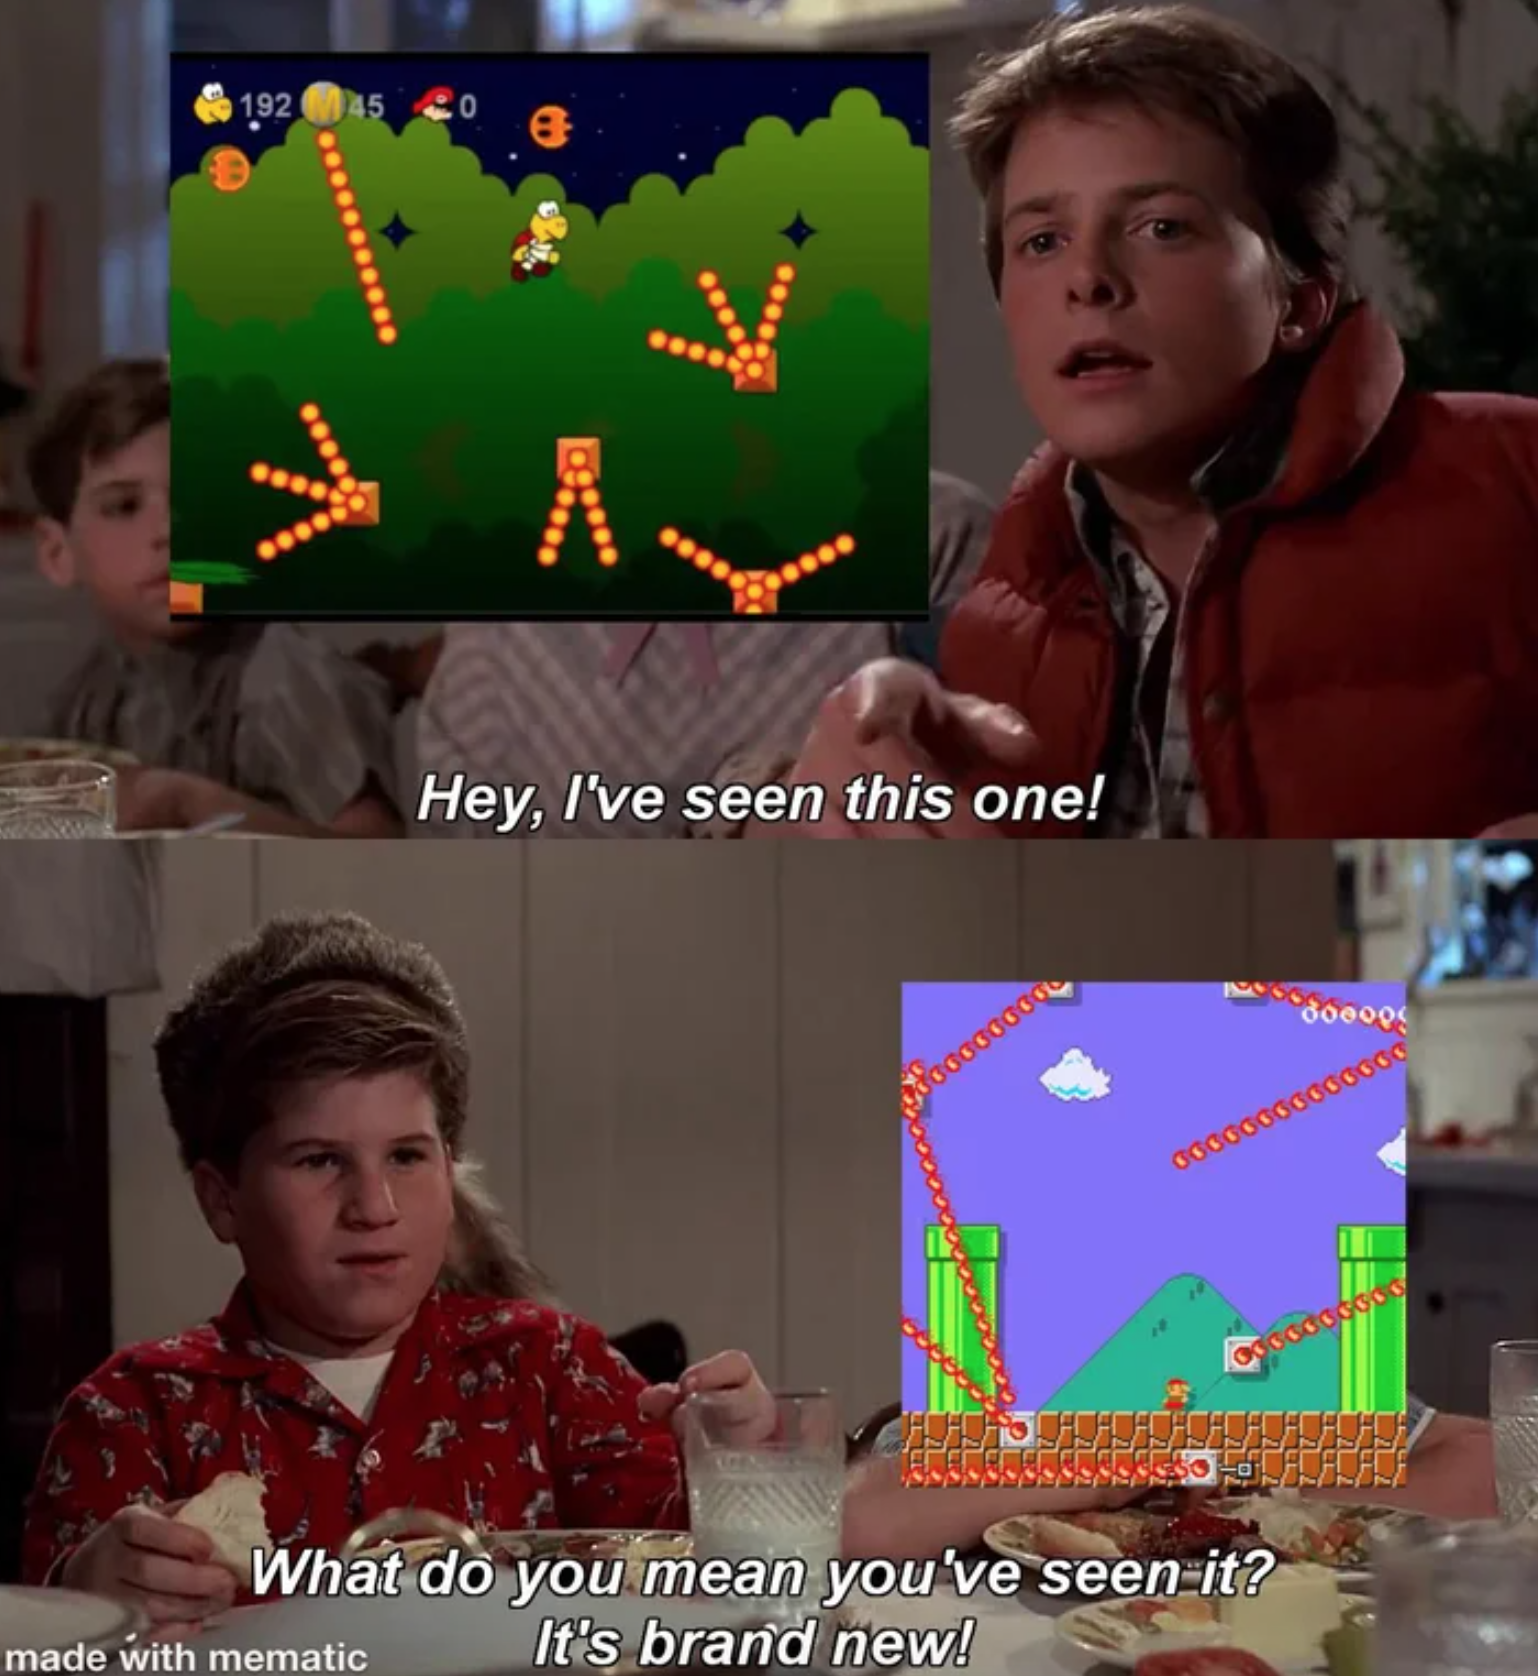 funny gaming memes - back to the future rerun - 1925 Hey, I've seen this one! doo What do you mean you've seen it? made with mematic It's brand new!